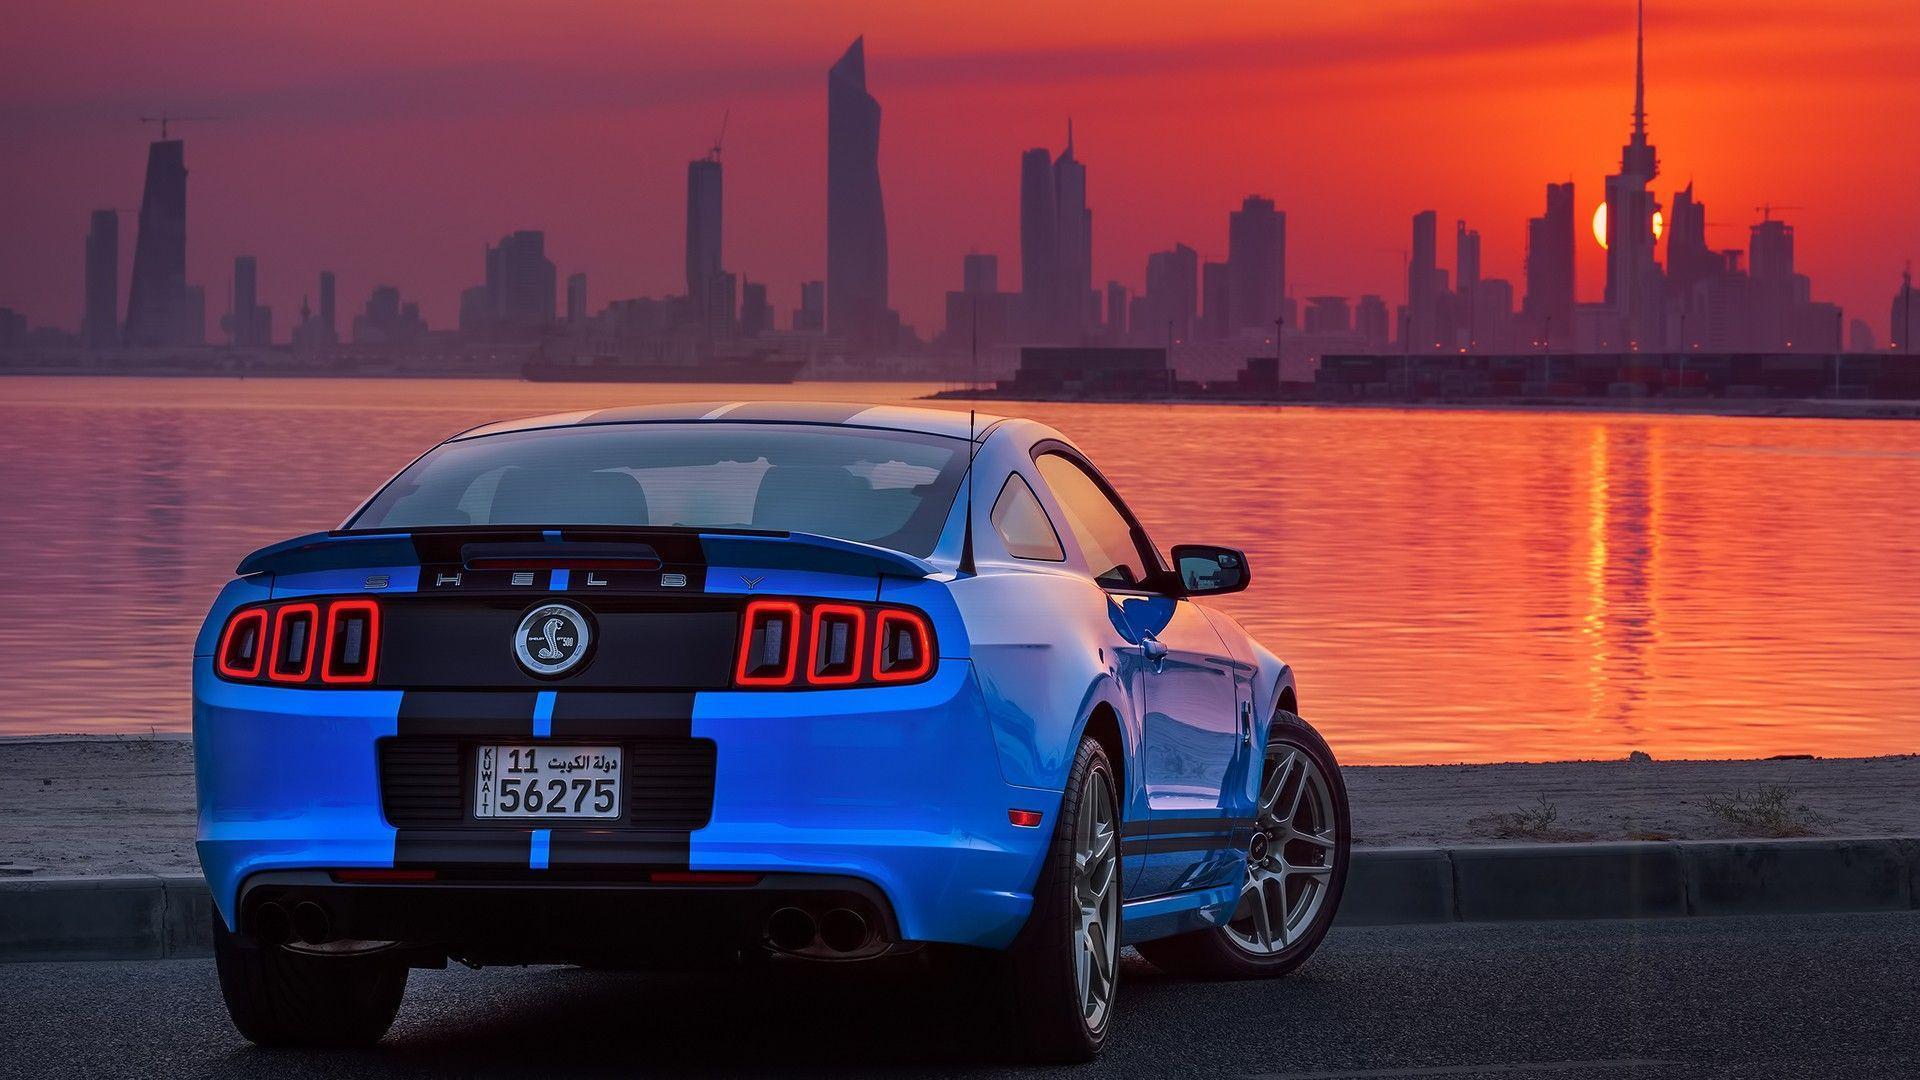 Shelby GT Ford USA, Car, Ford Mustang Shelby, Sunrise, Kuwait